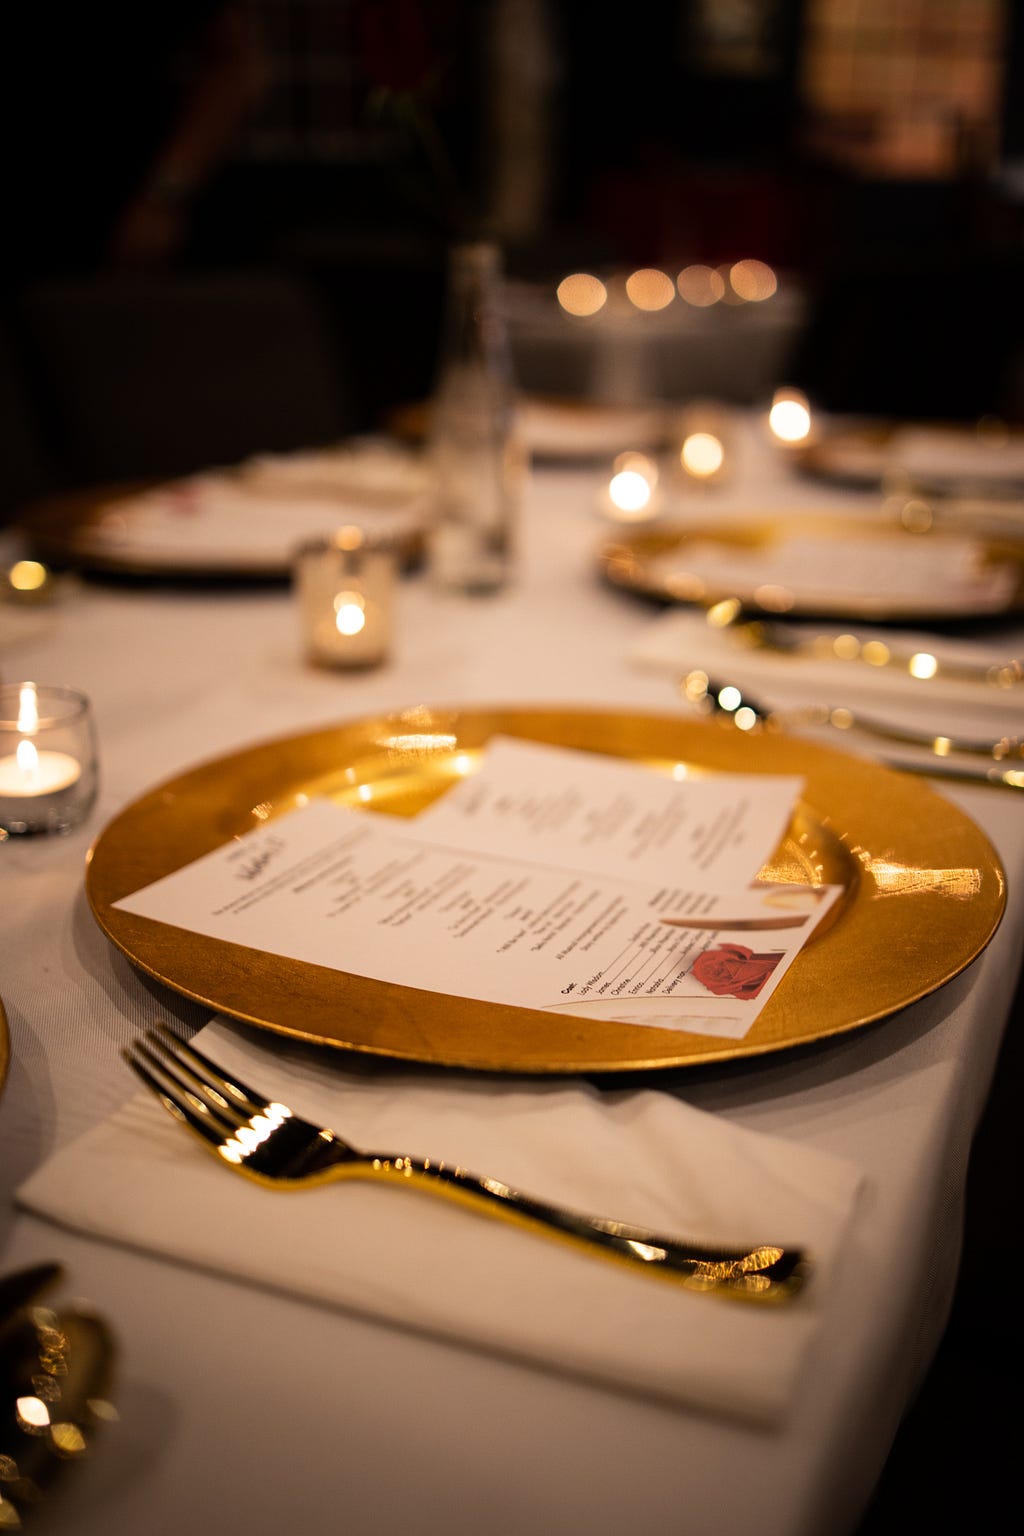 A gold dinner plate on a formal dining table with a menu in the foreground is accented by candlelight and out-of-focus dinnerware.